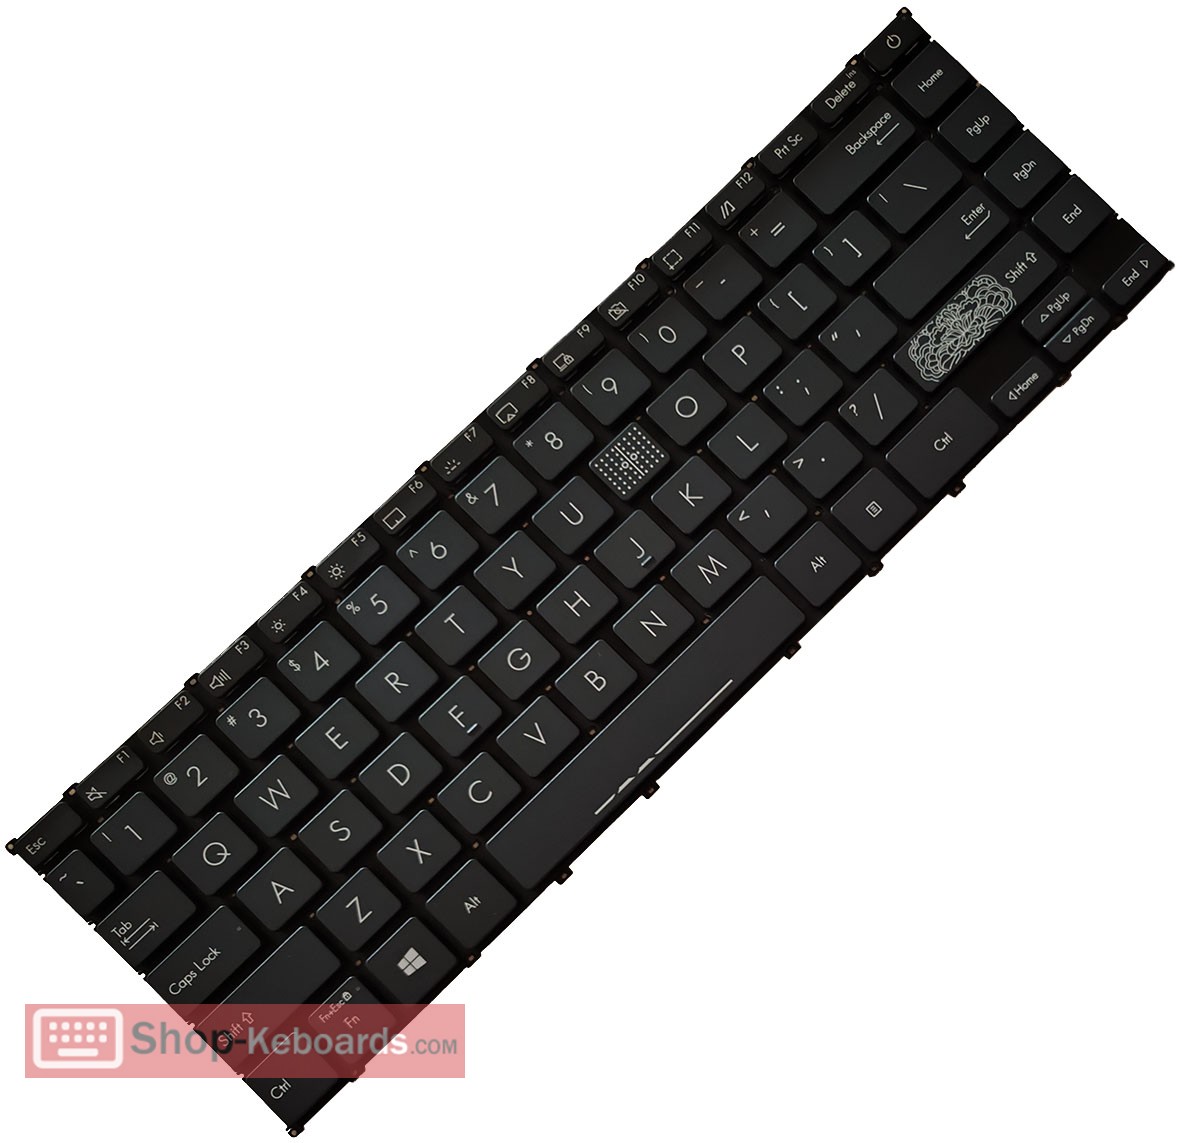 Asus HQ21013158007 Keyboard replacement